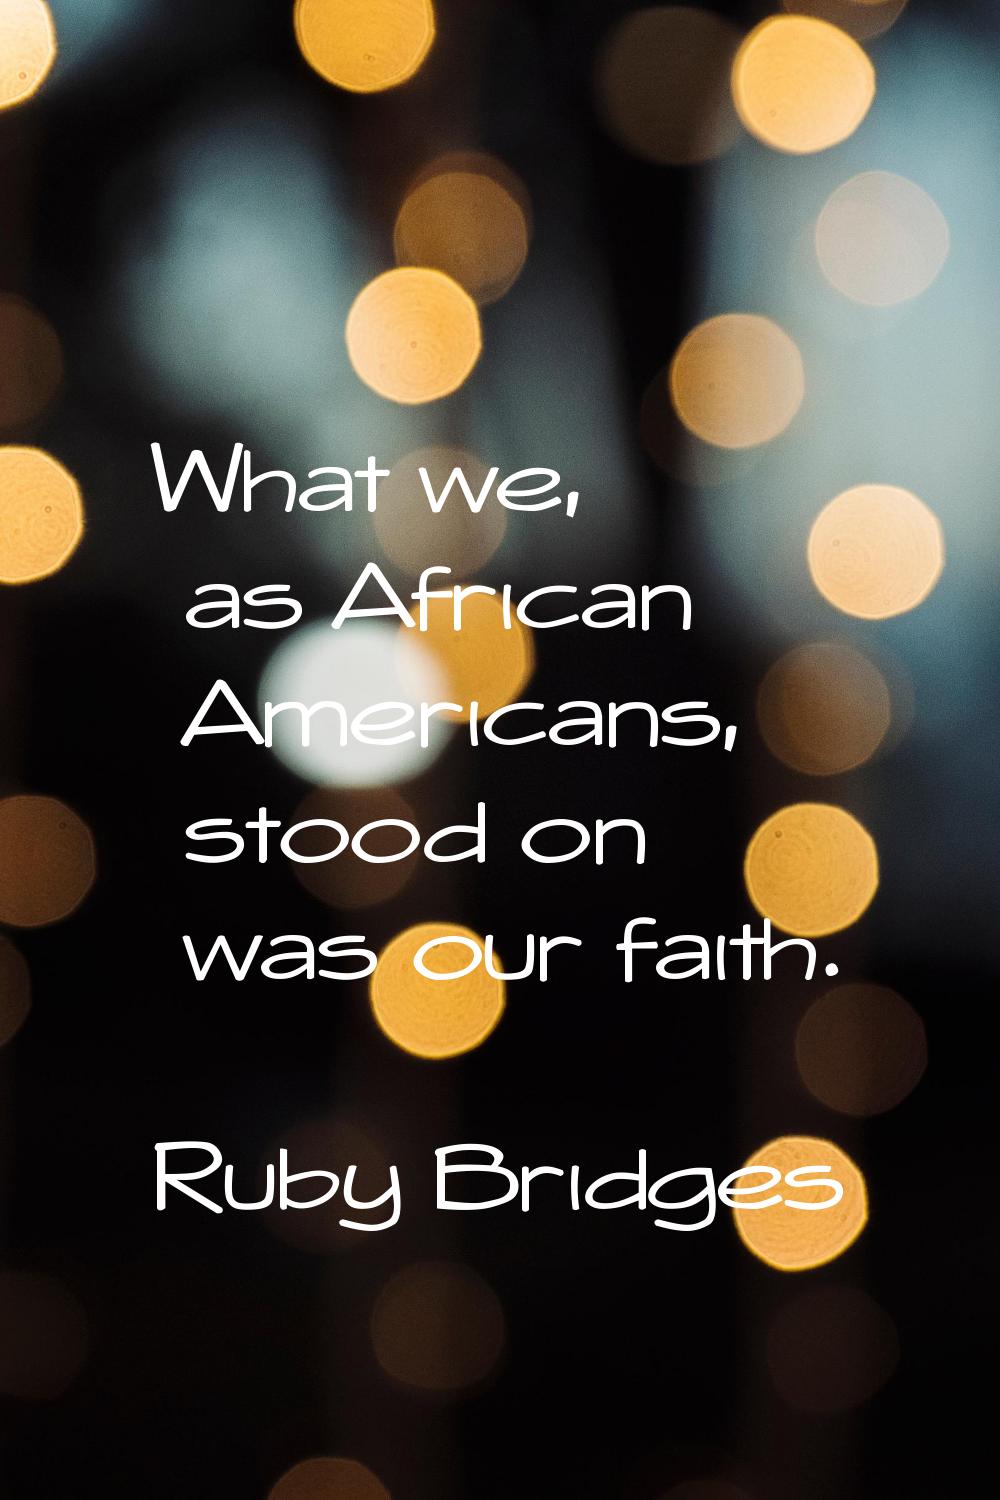 What we, as African Americans, stood on was our faith.